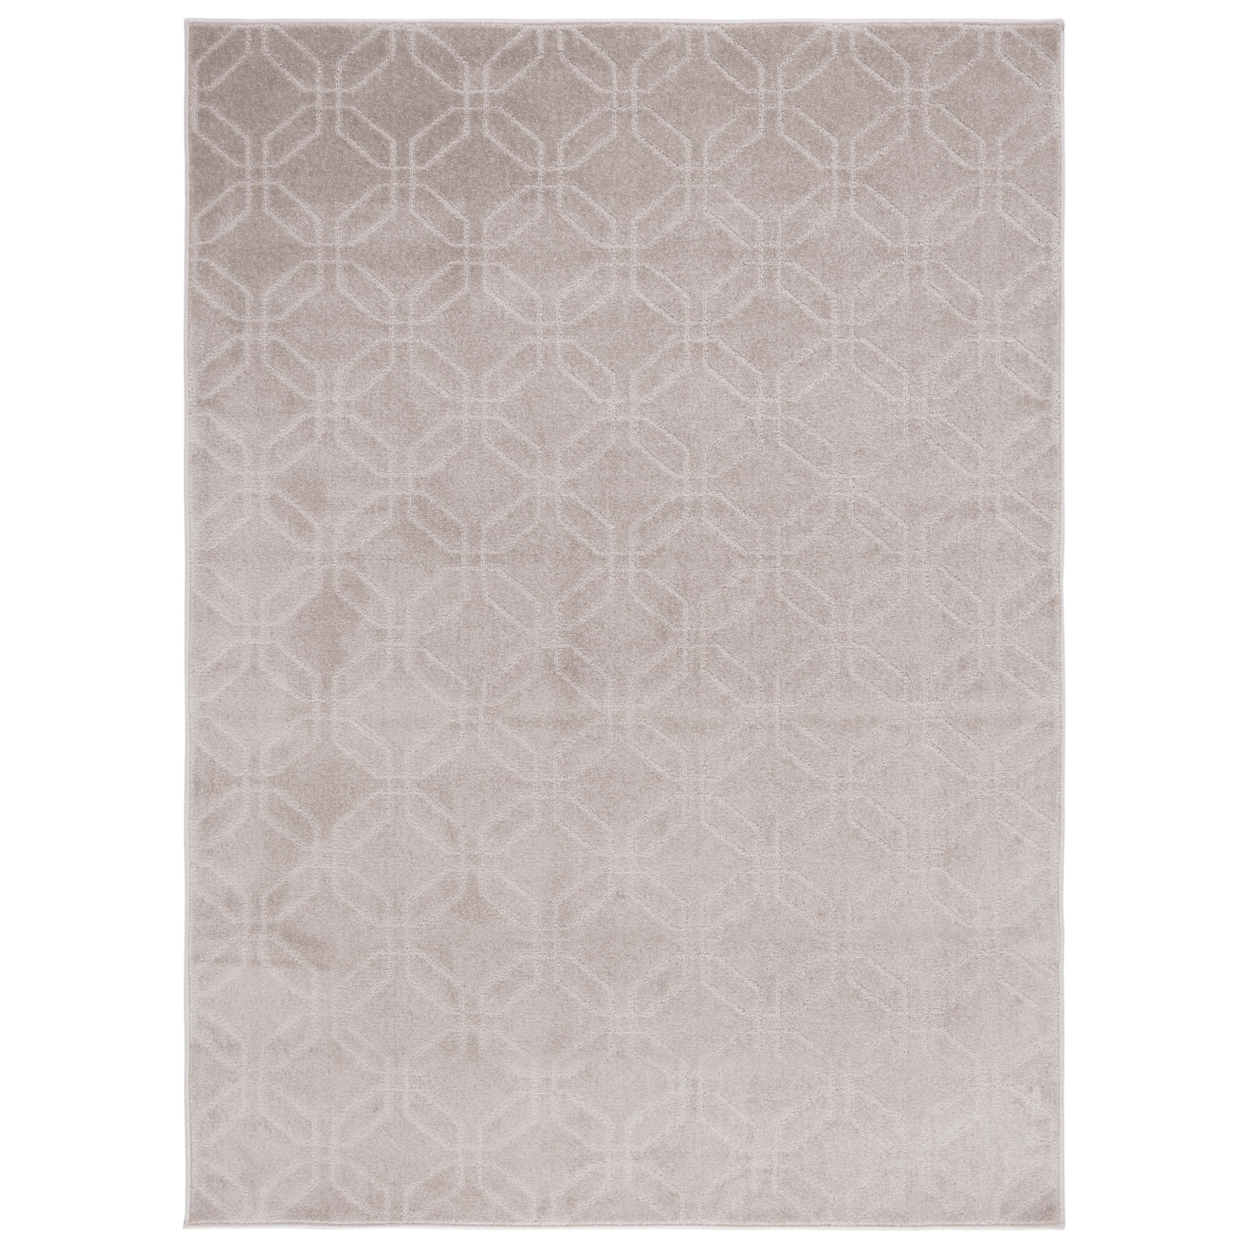 Safavieh PNS406B Pattern And Solid Beige - Grey / Ivory, 5'-3 X 7'-6 Rectangle